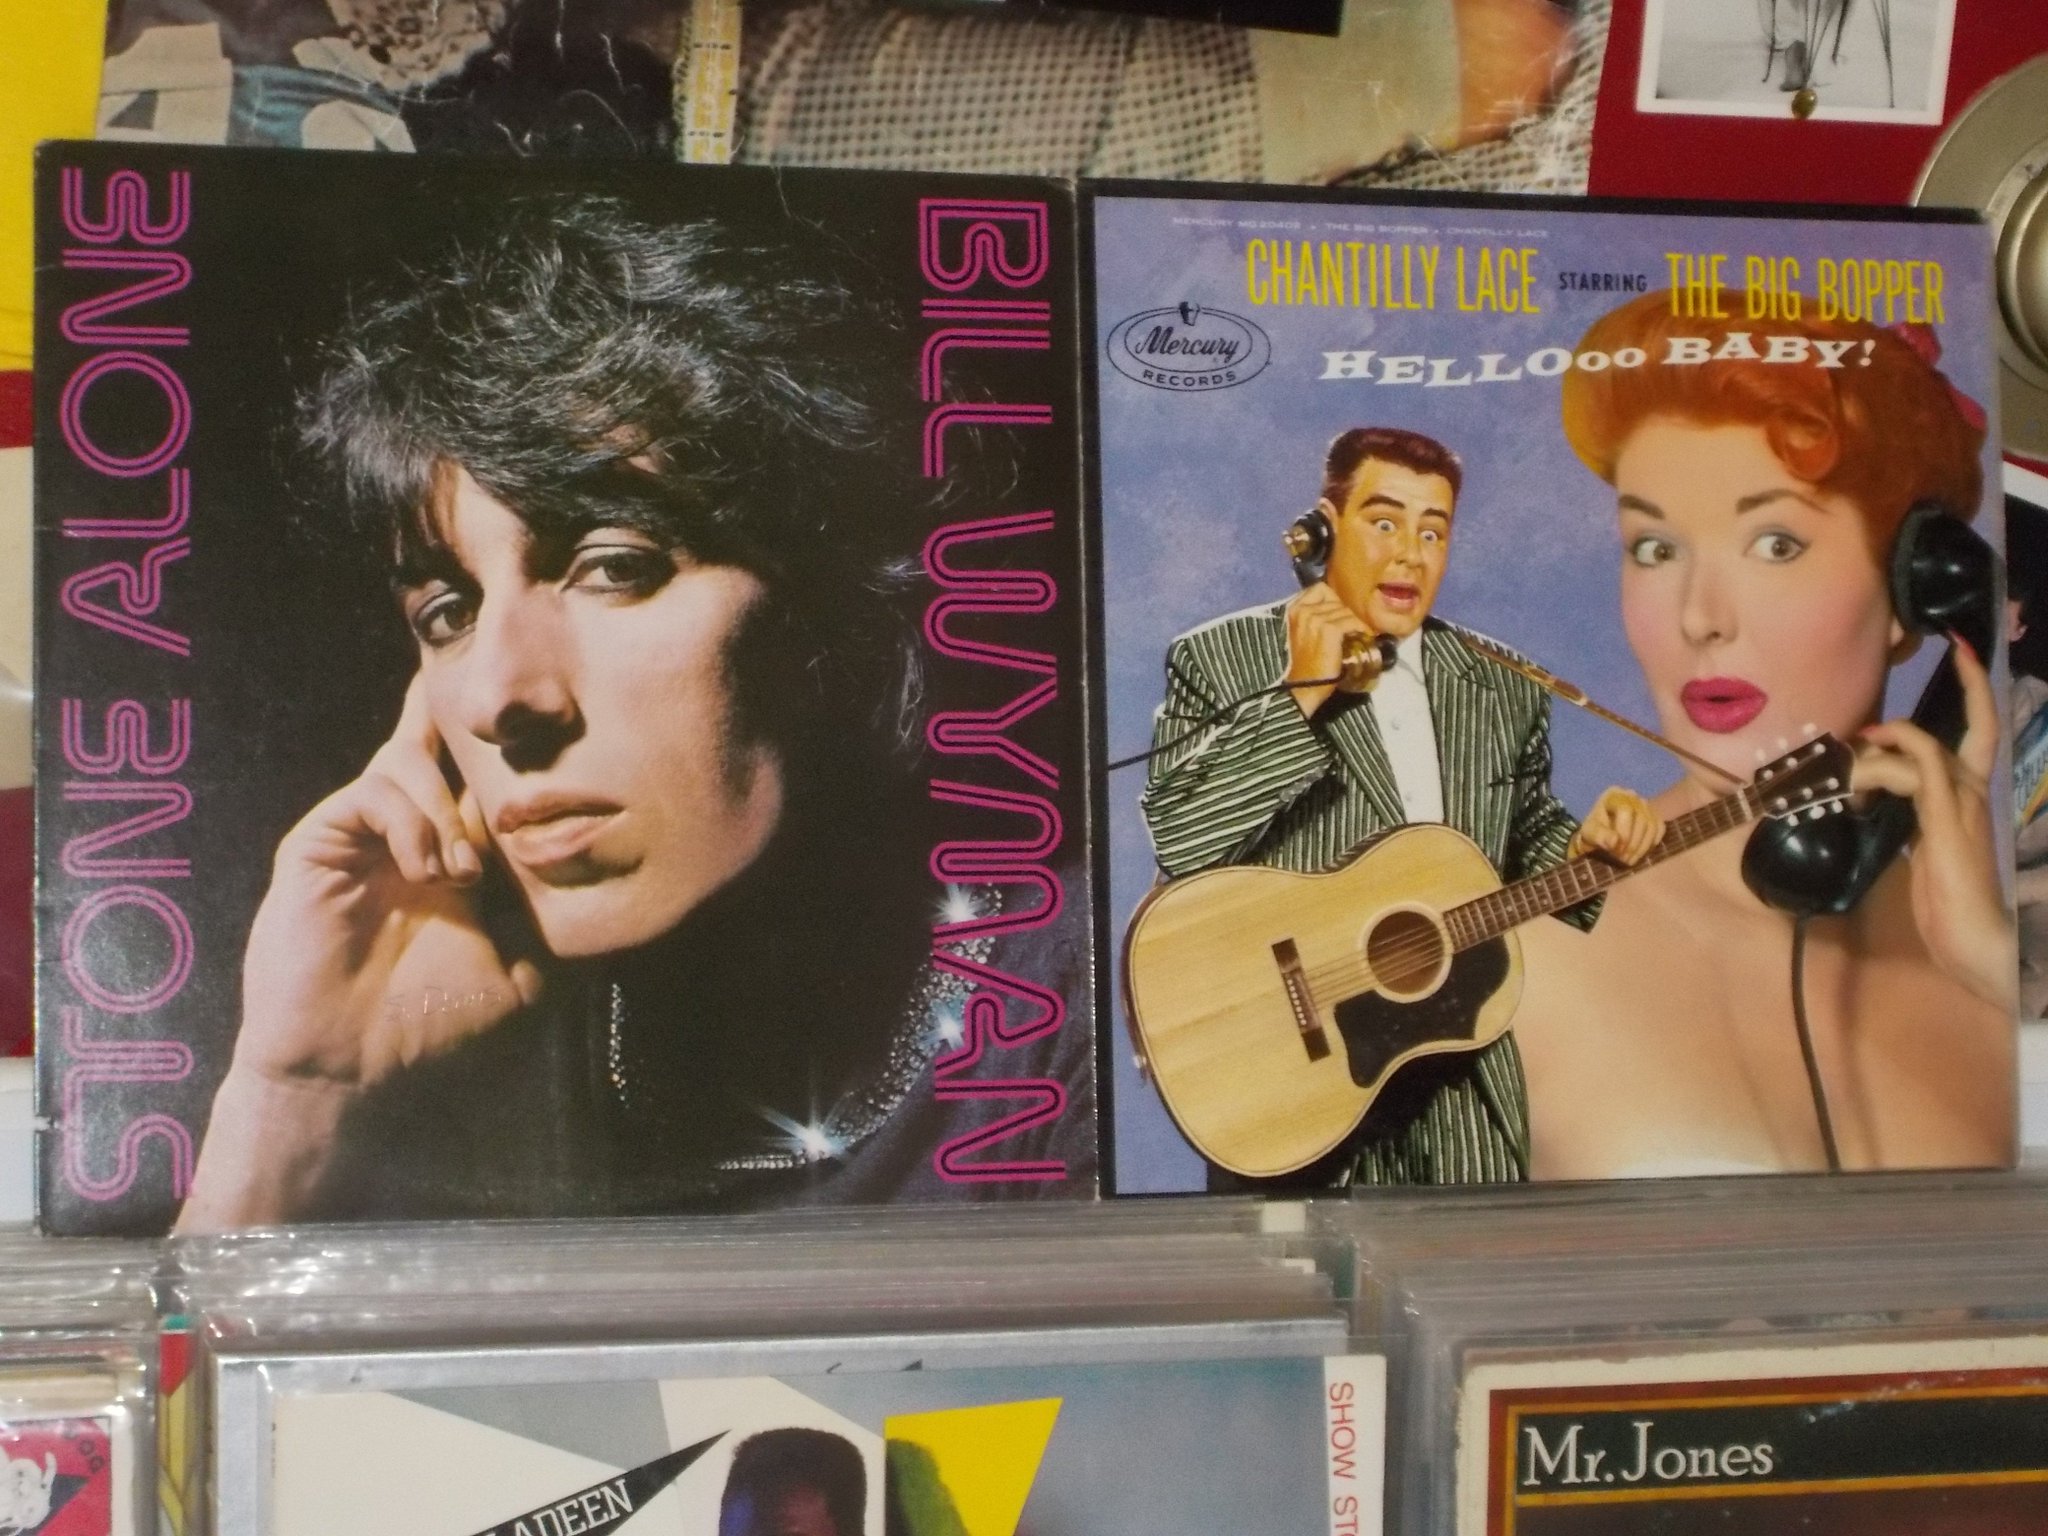 Happy Birthday to Bill Wyman of the Rolling Stones and the late Big Bopper 